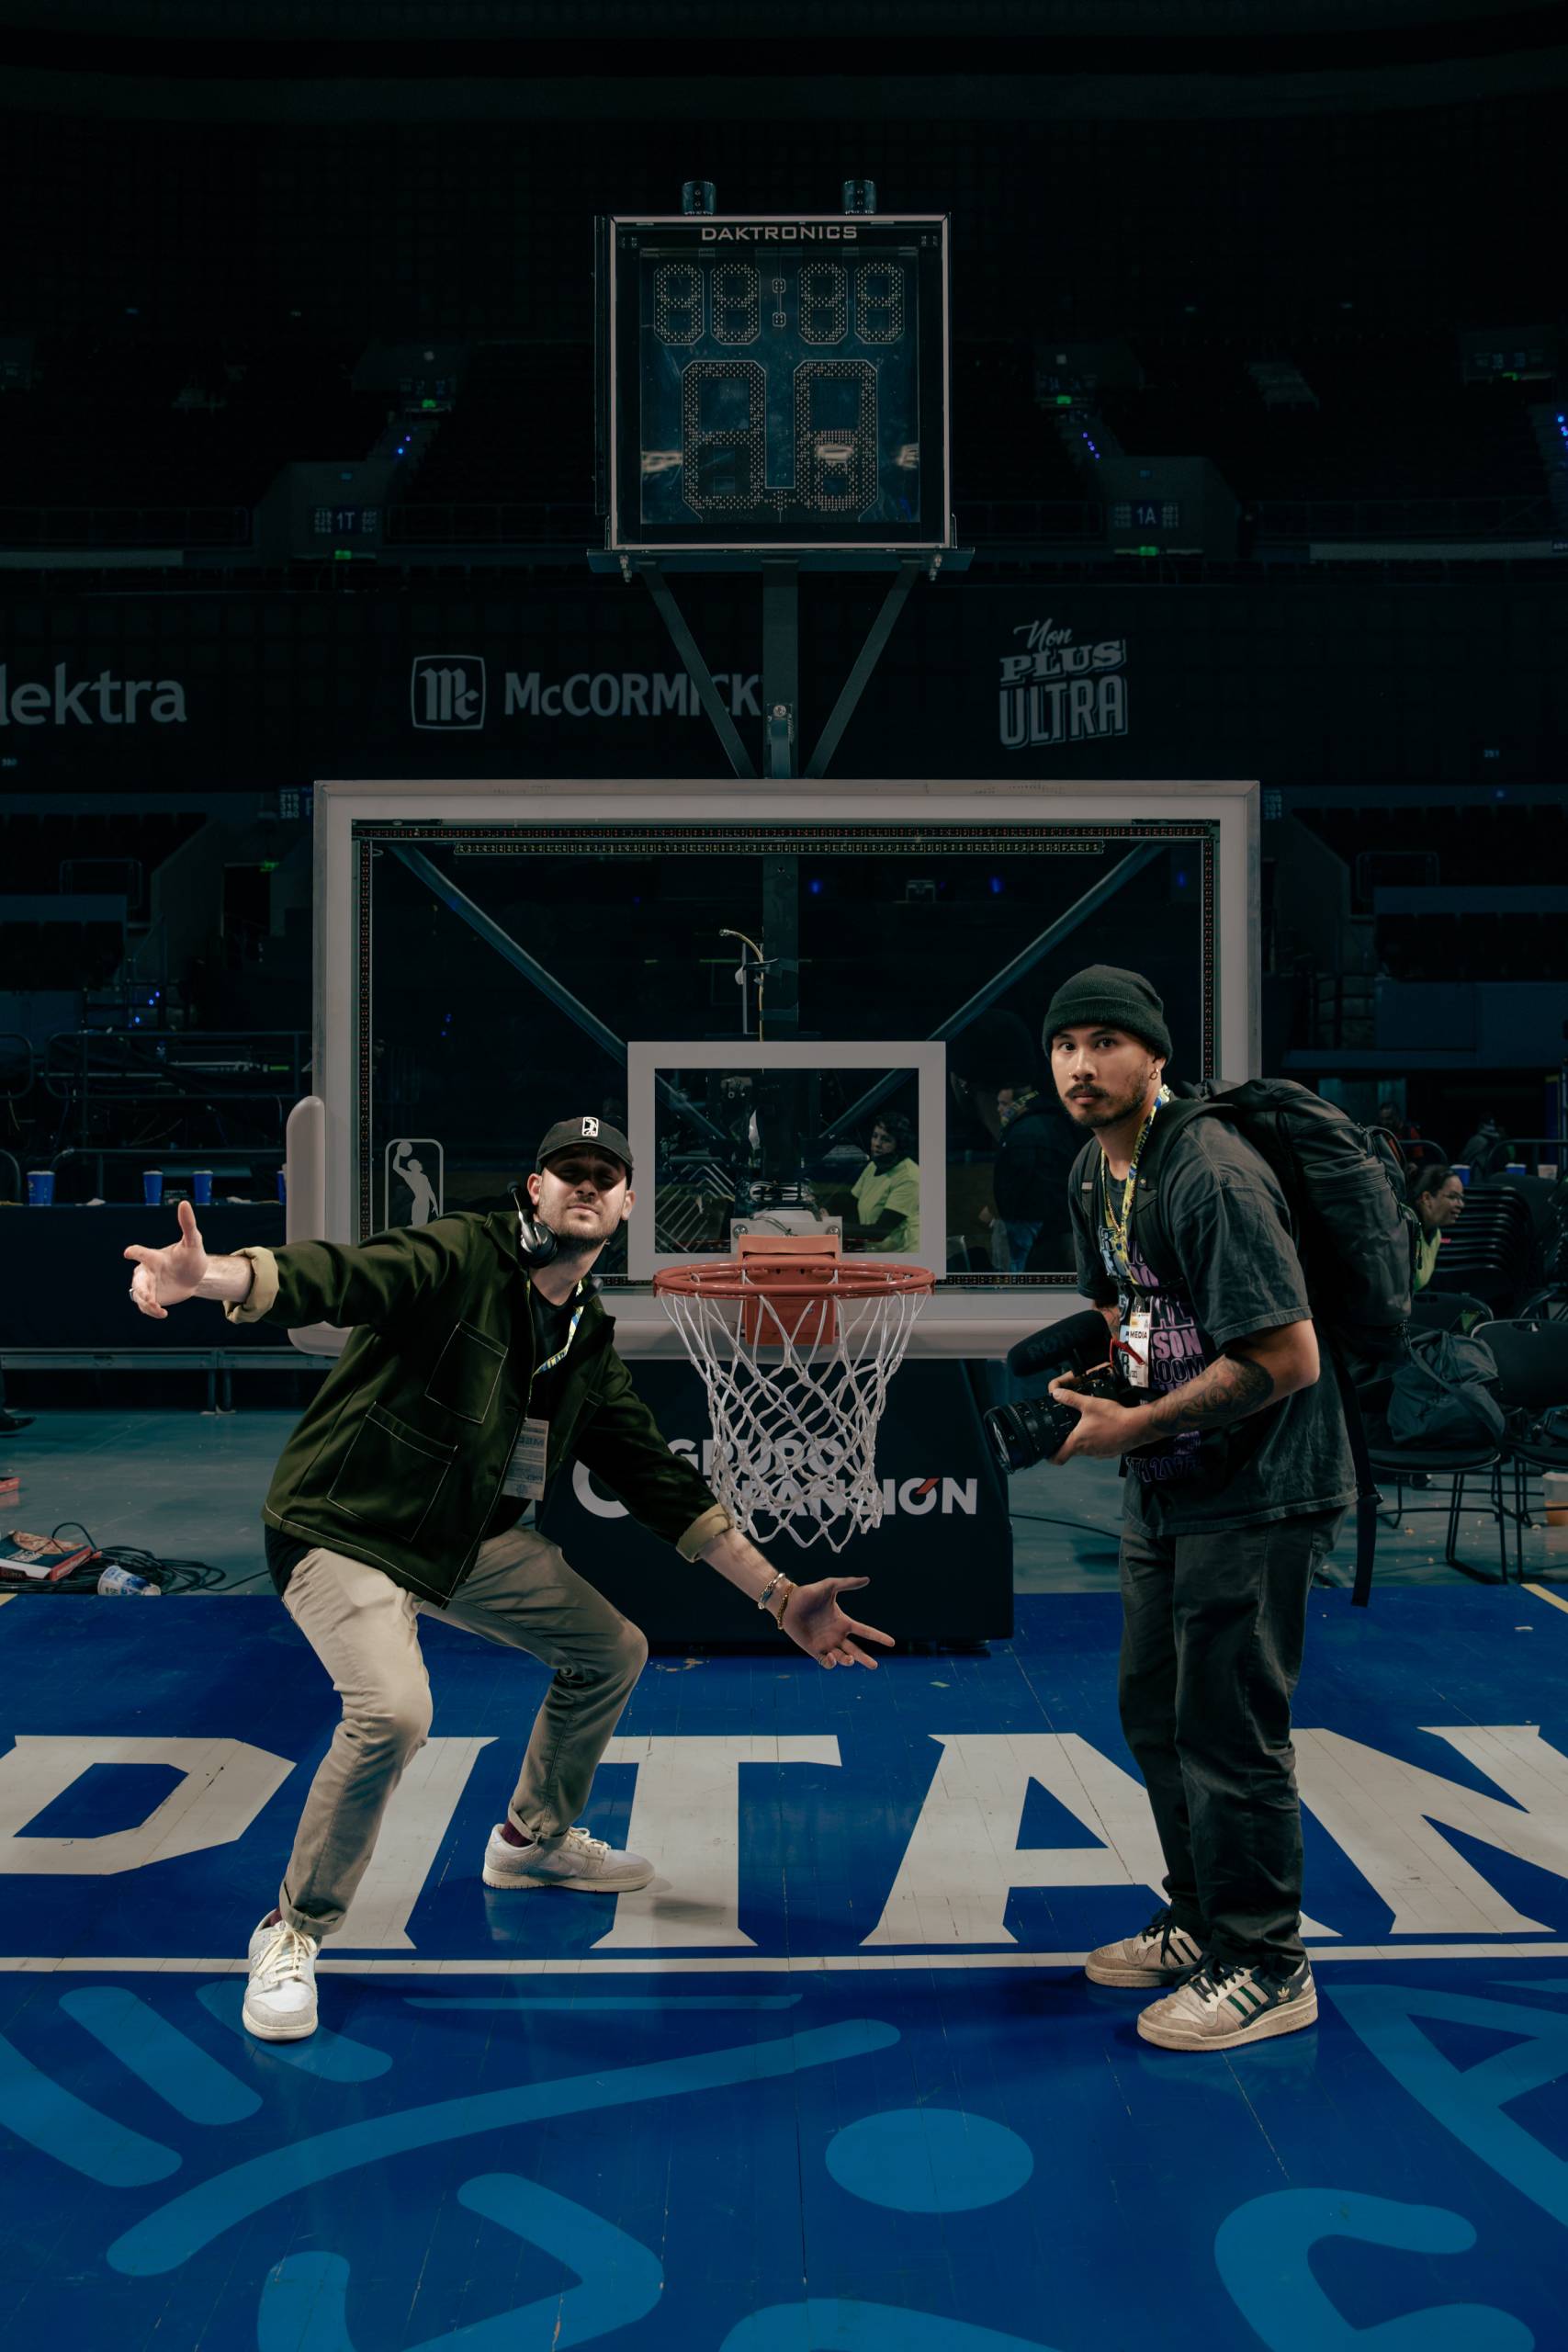 a film director and photographer pose on a basketball court in between filming